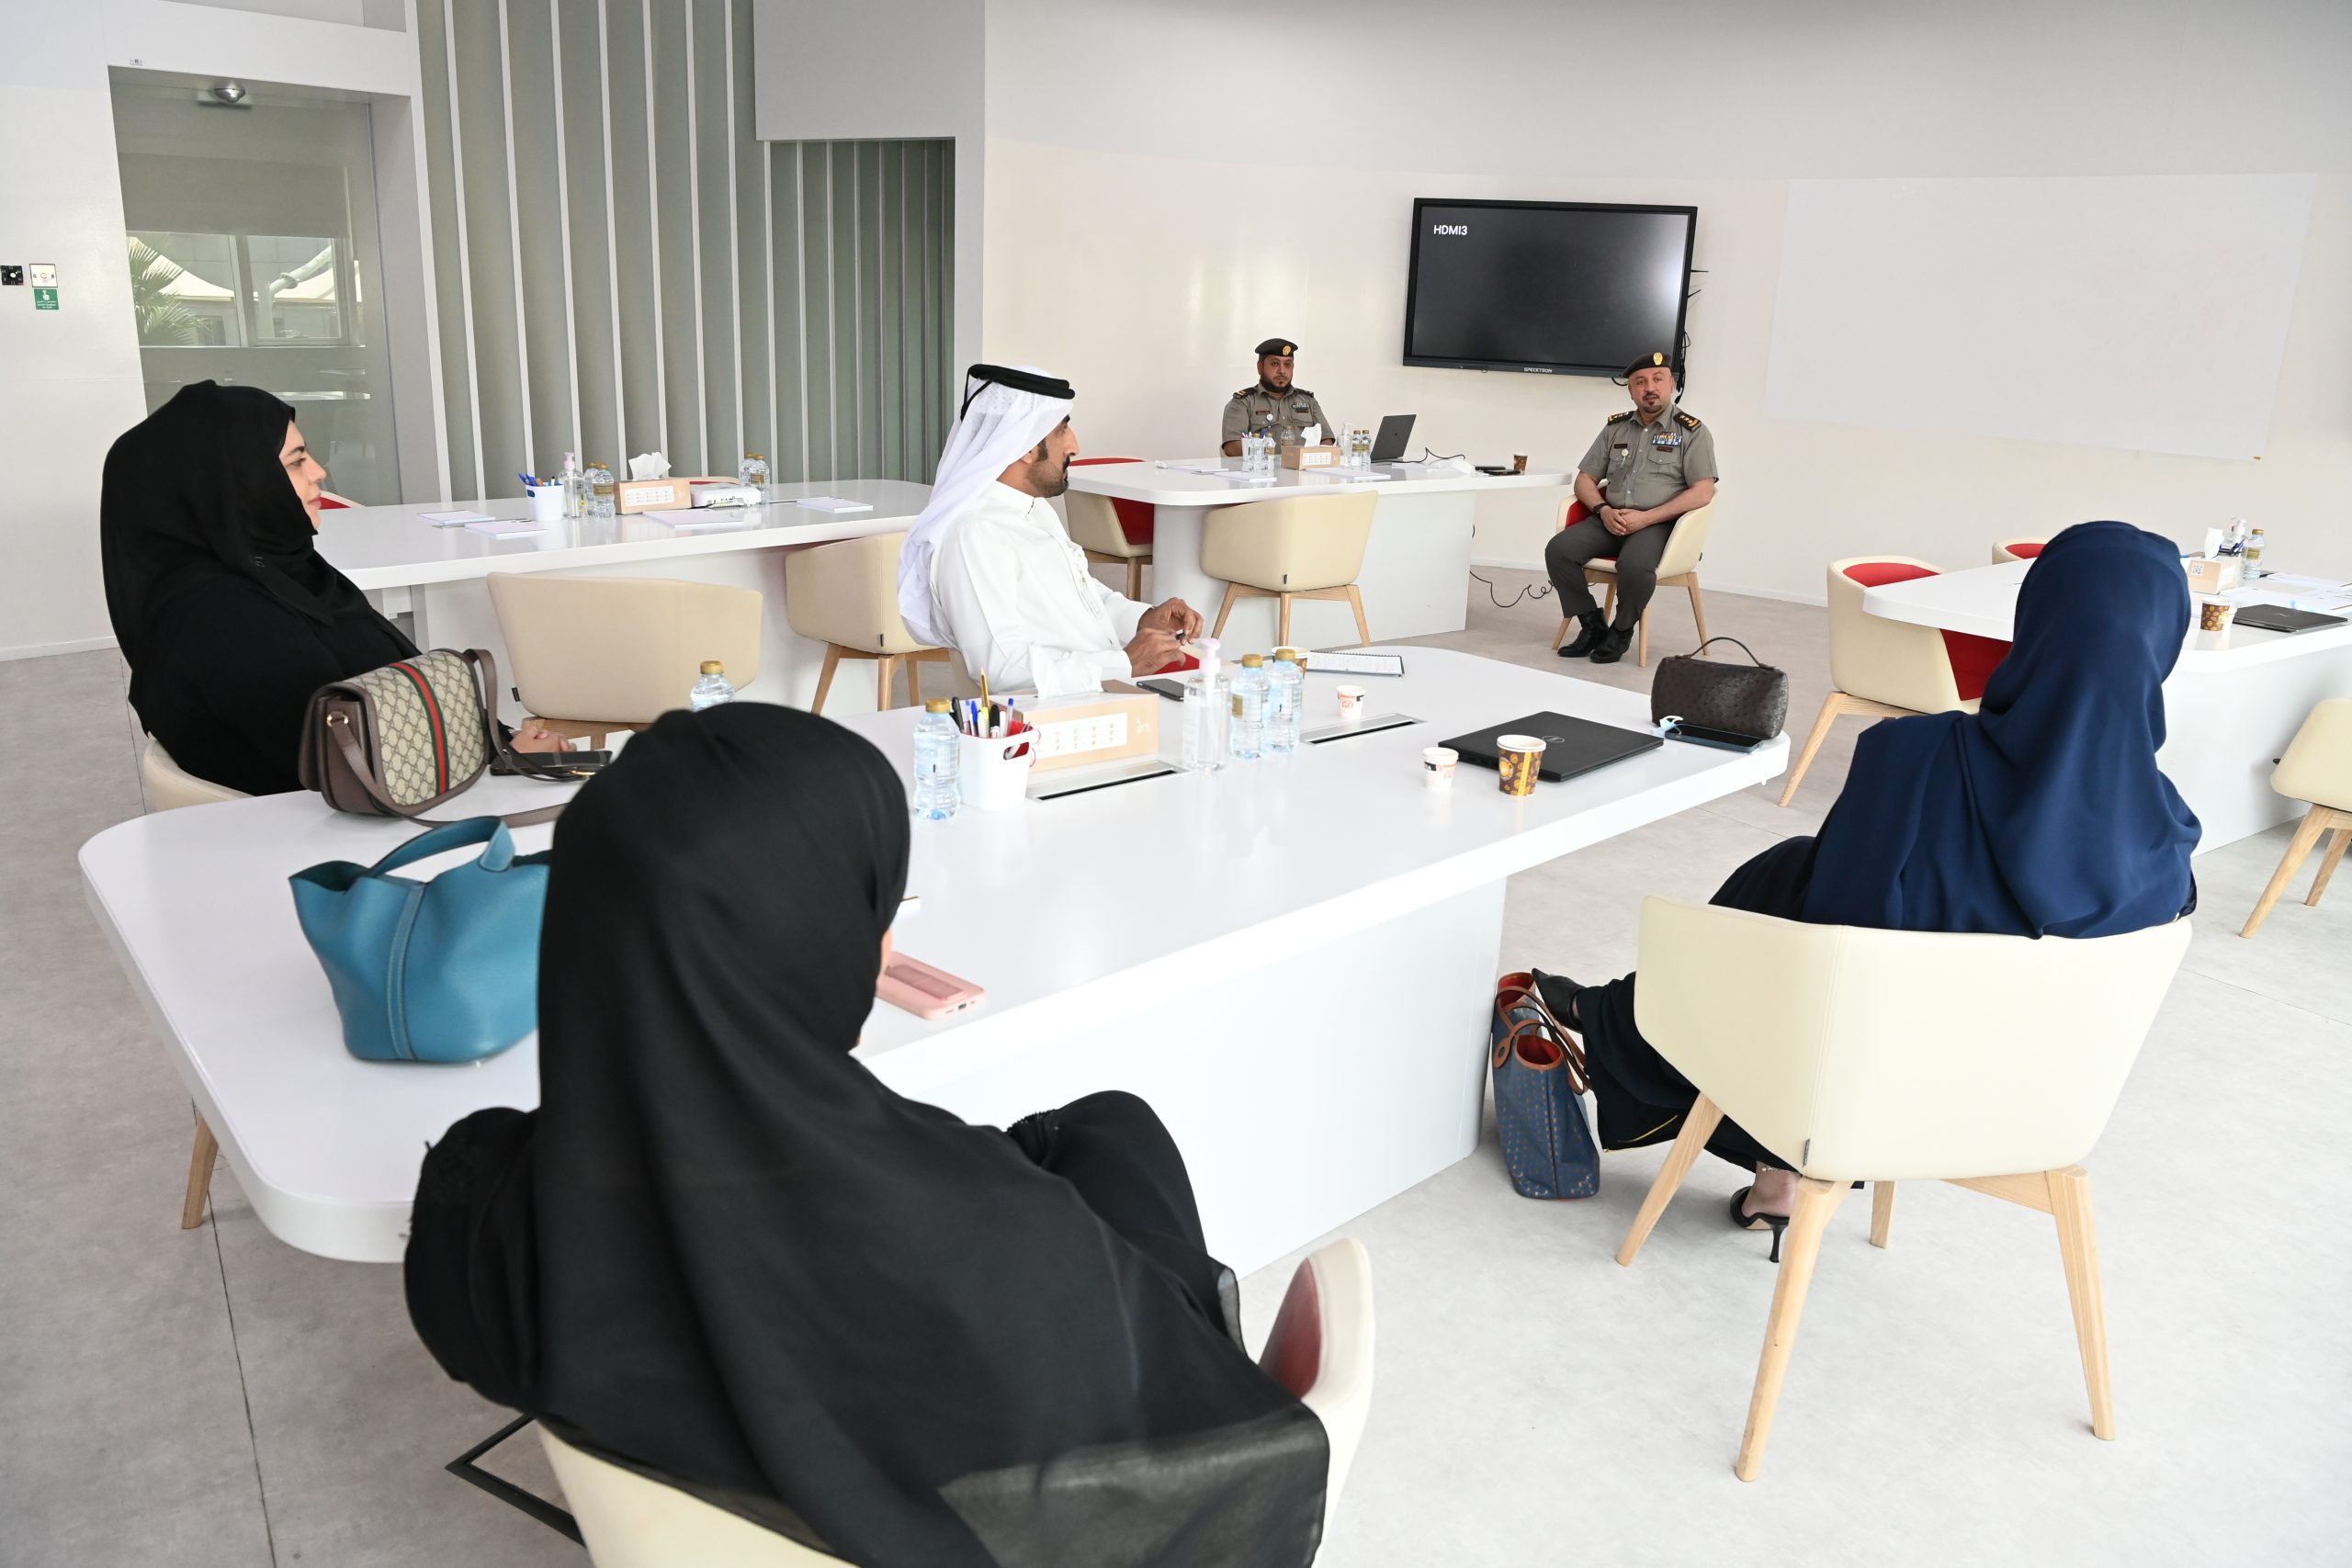 A delegation from “Dubai Health Authority” pays a visit to the “Authority Innovation Center” in Abu Dhabi